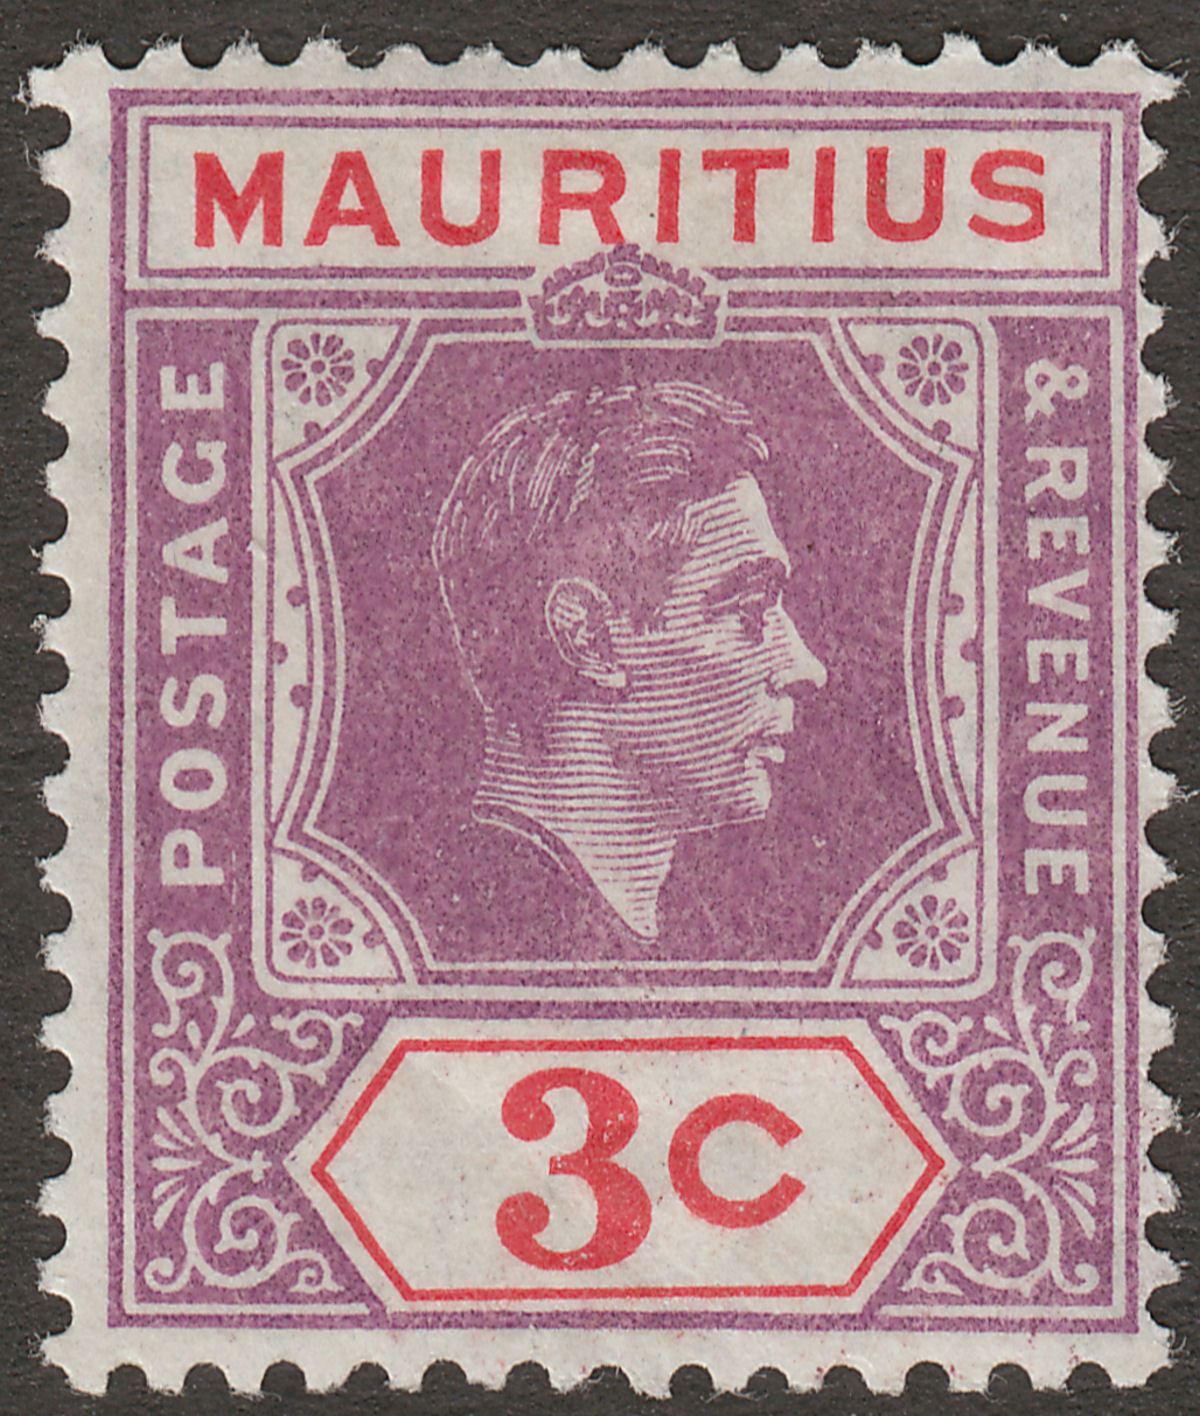 Mauritius 1938 KGVI 3c Purple + Scarlet w Partially Sliced S Variety Mint SG253